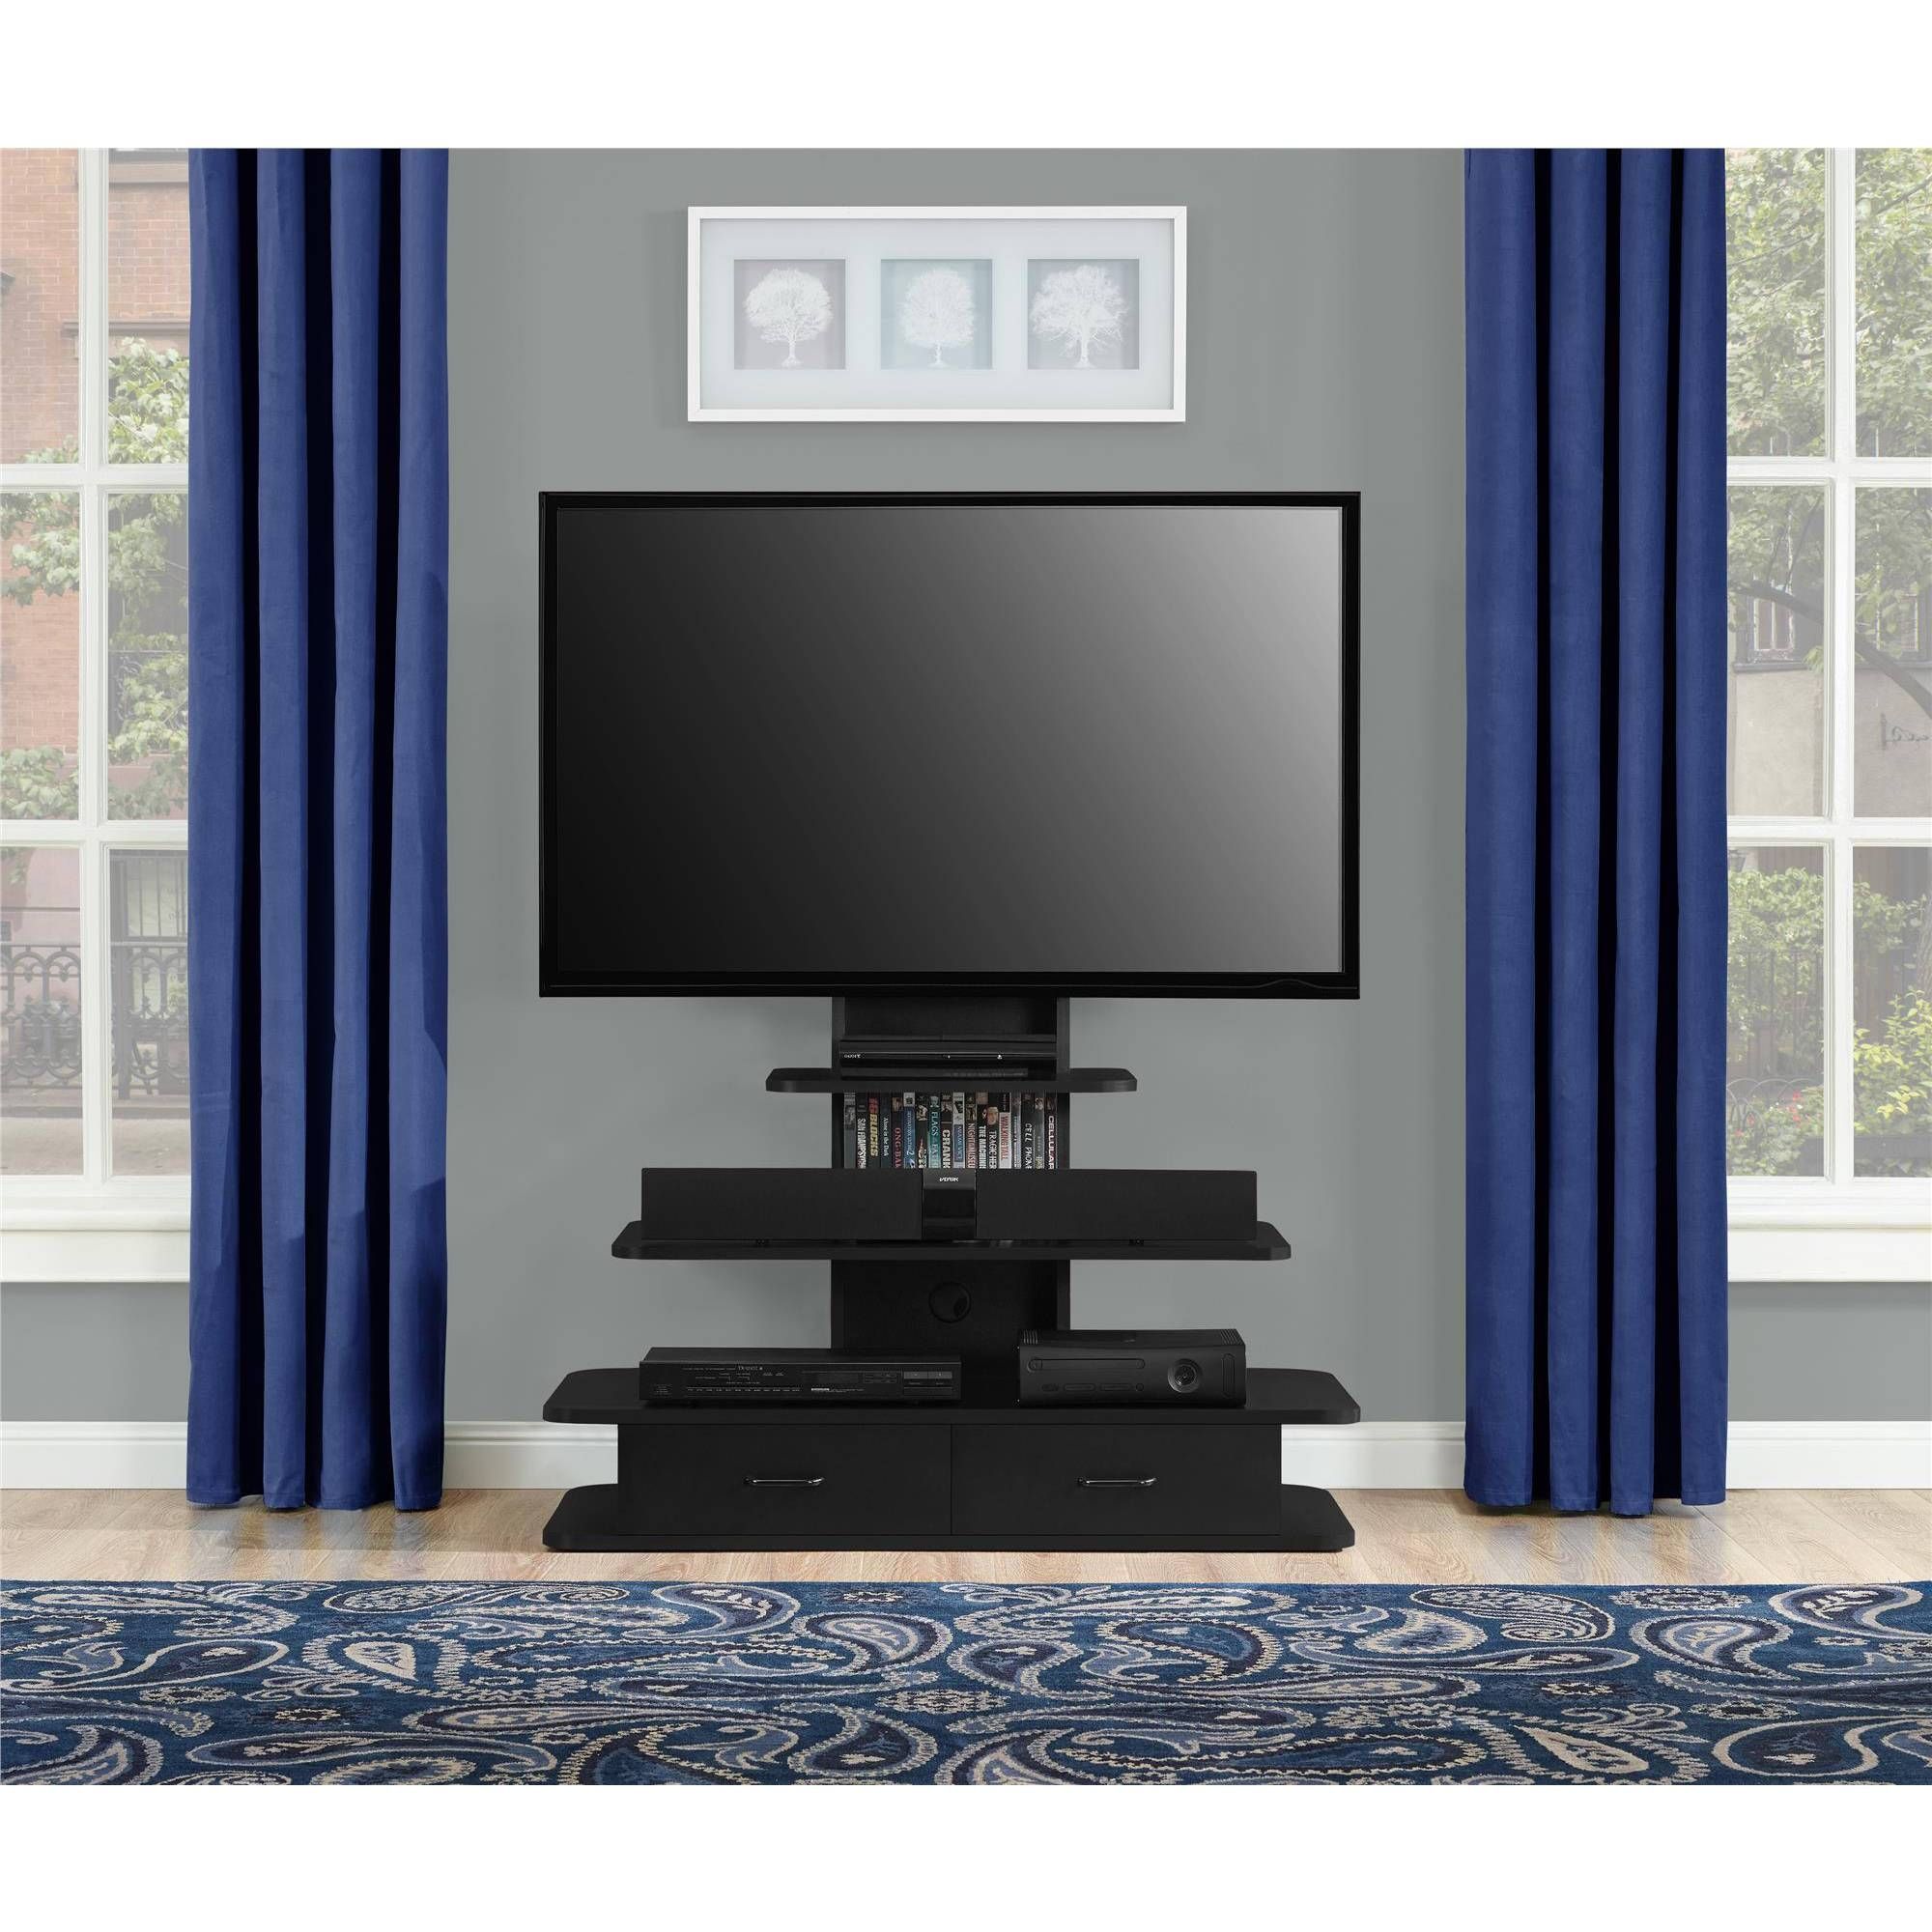 Black Freestanding Tv Stand With Mount And Drawers Of Cool Tv Inside Freestanding Tv Stands (View 5 of 15)